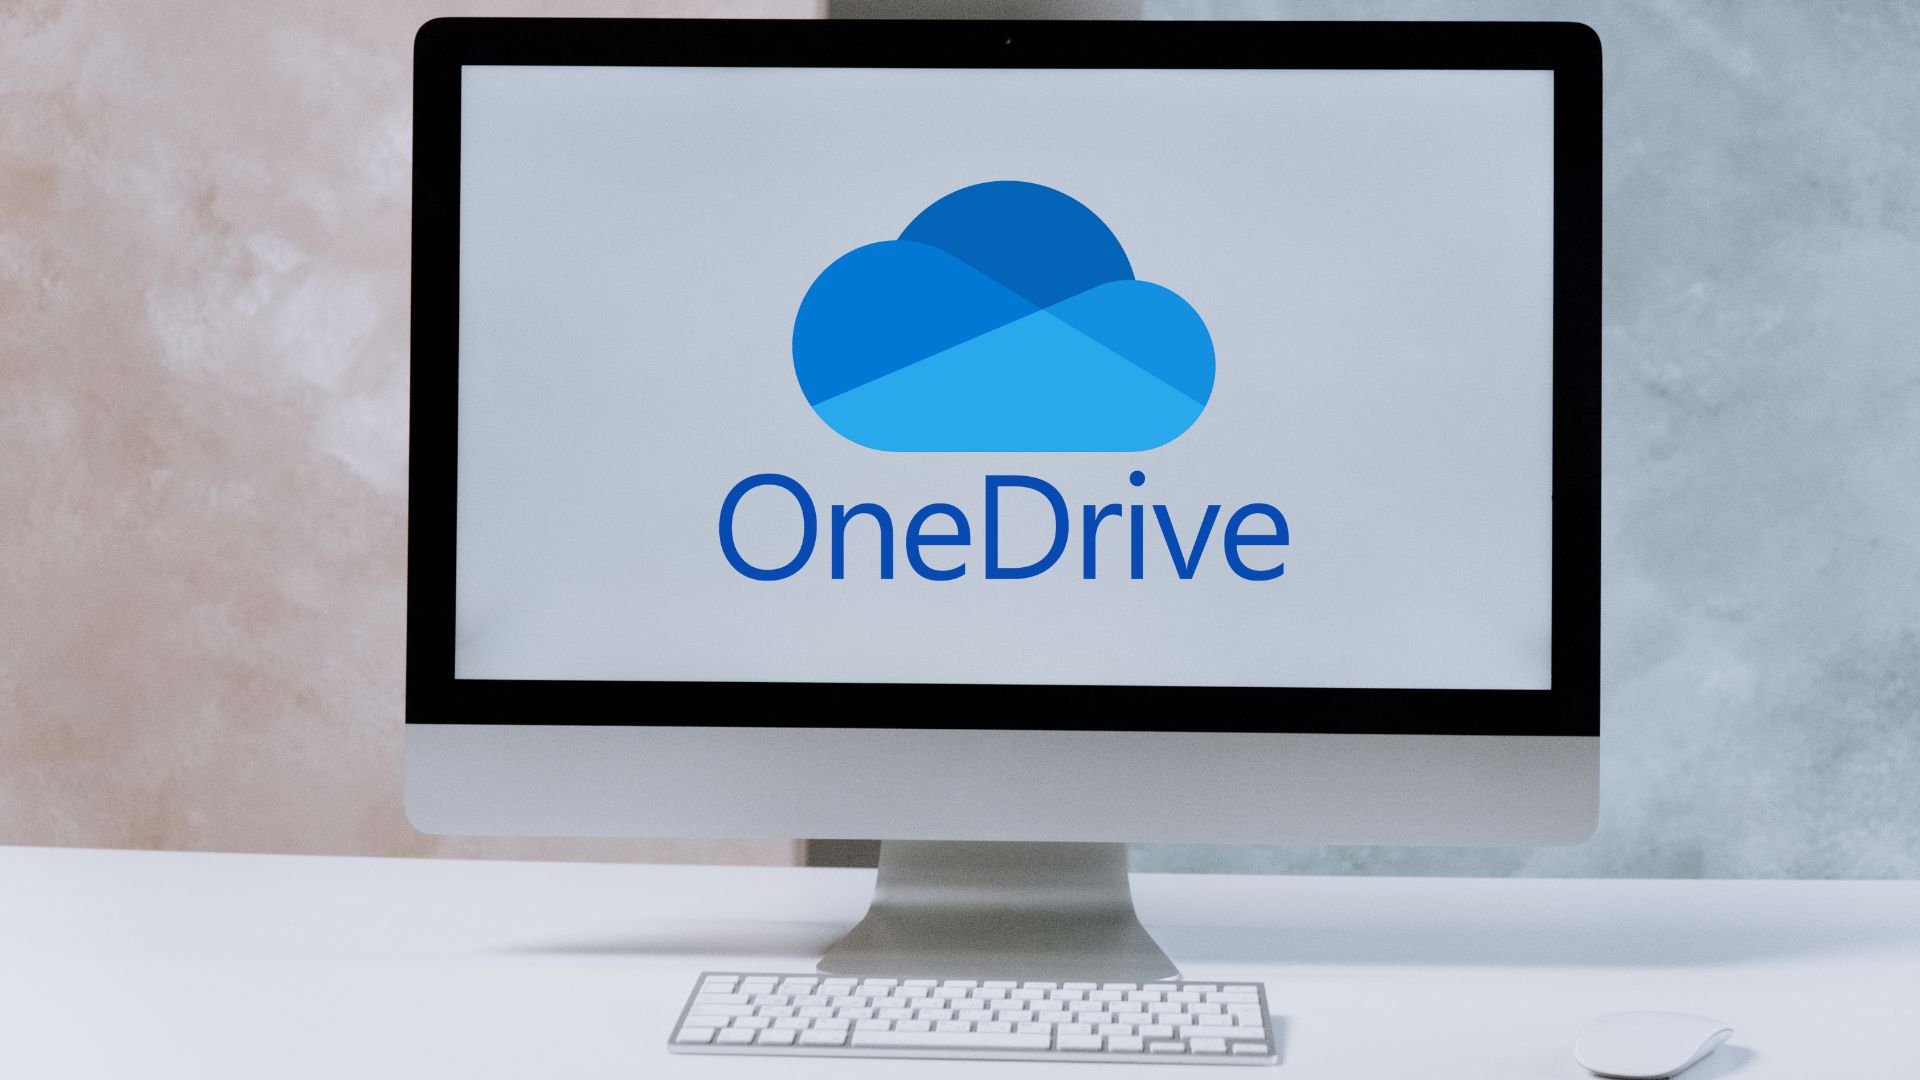 What is onedrive and what is it for